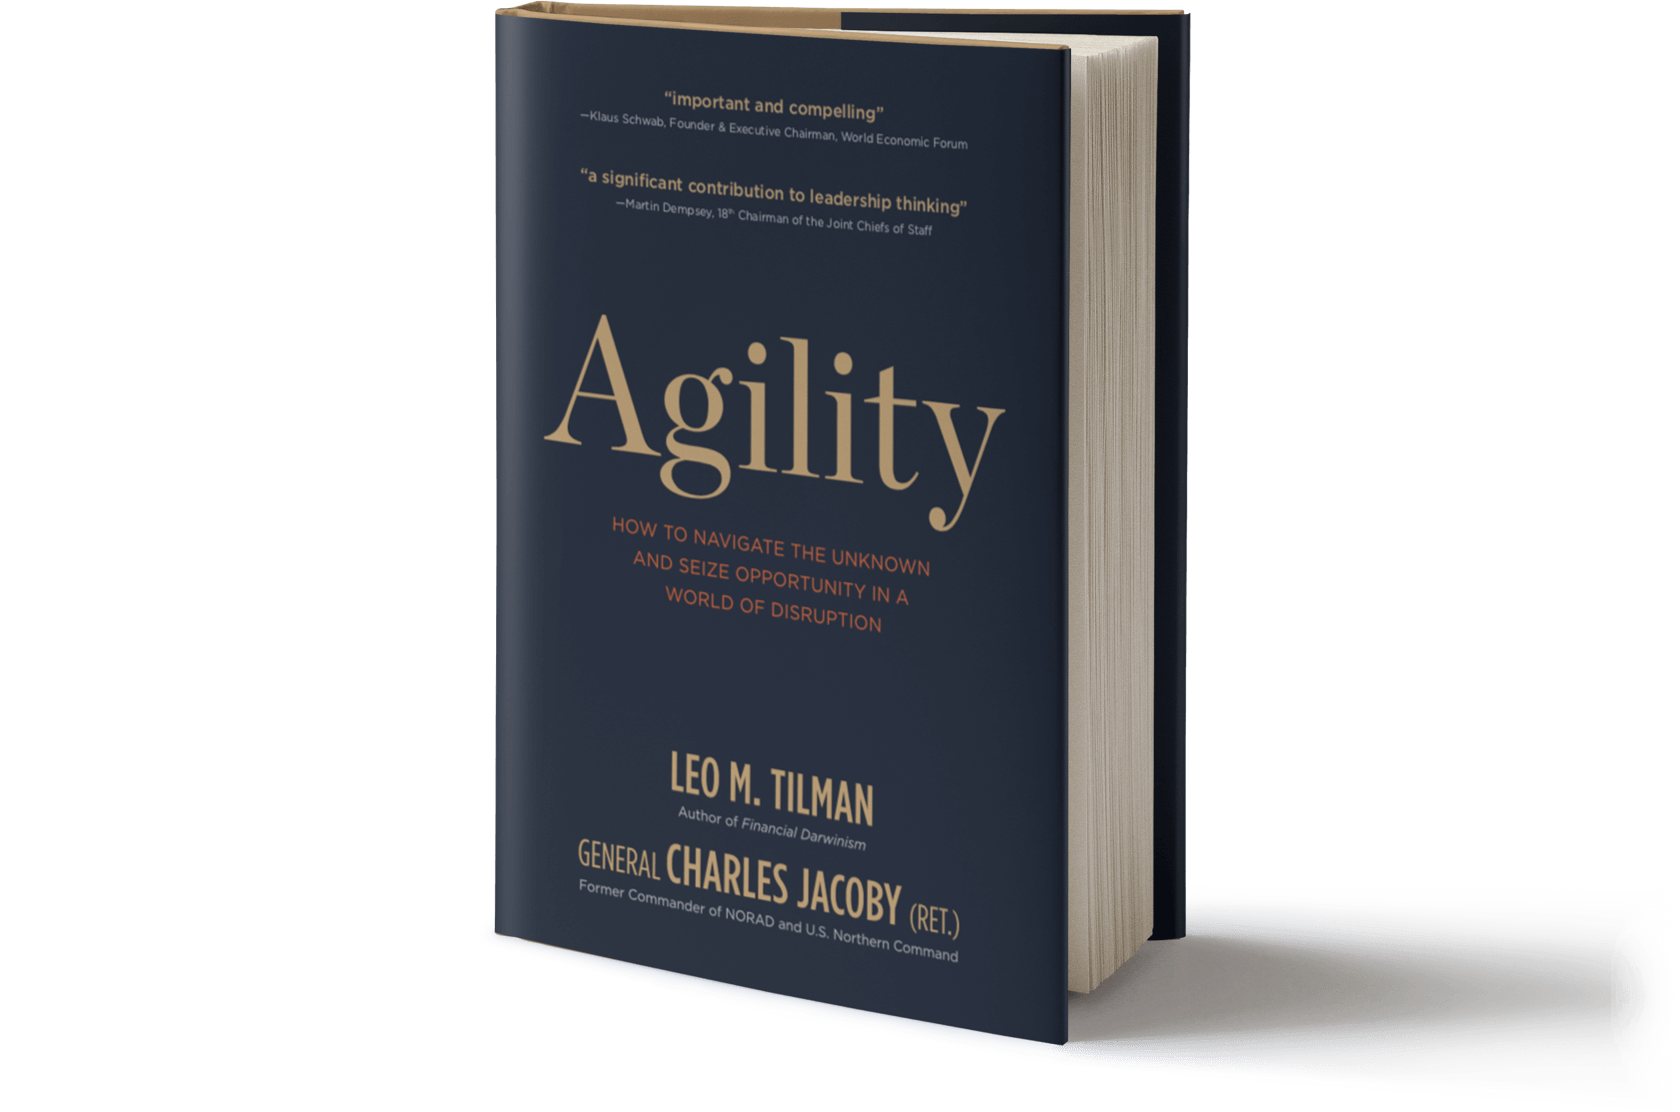 AGILITY: HOW TO NAVIGATE THE UNKNOWN AND SEIZE OPPORTUNITY IN A WORLD OF DISRUPTION